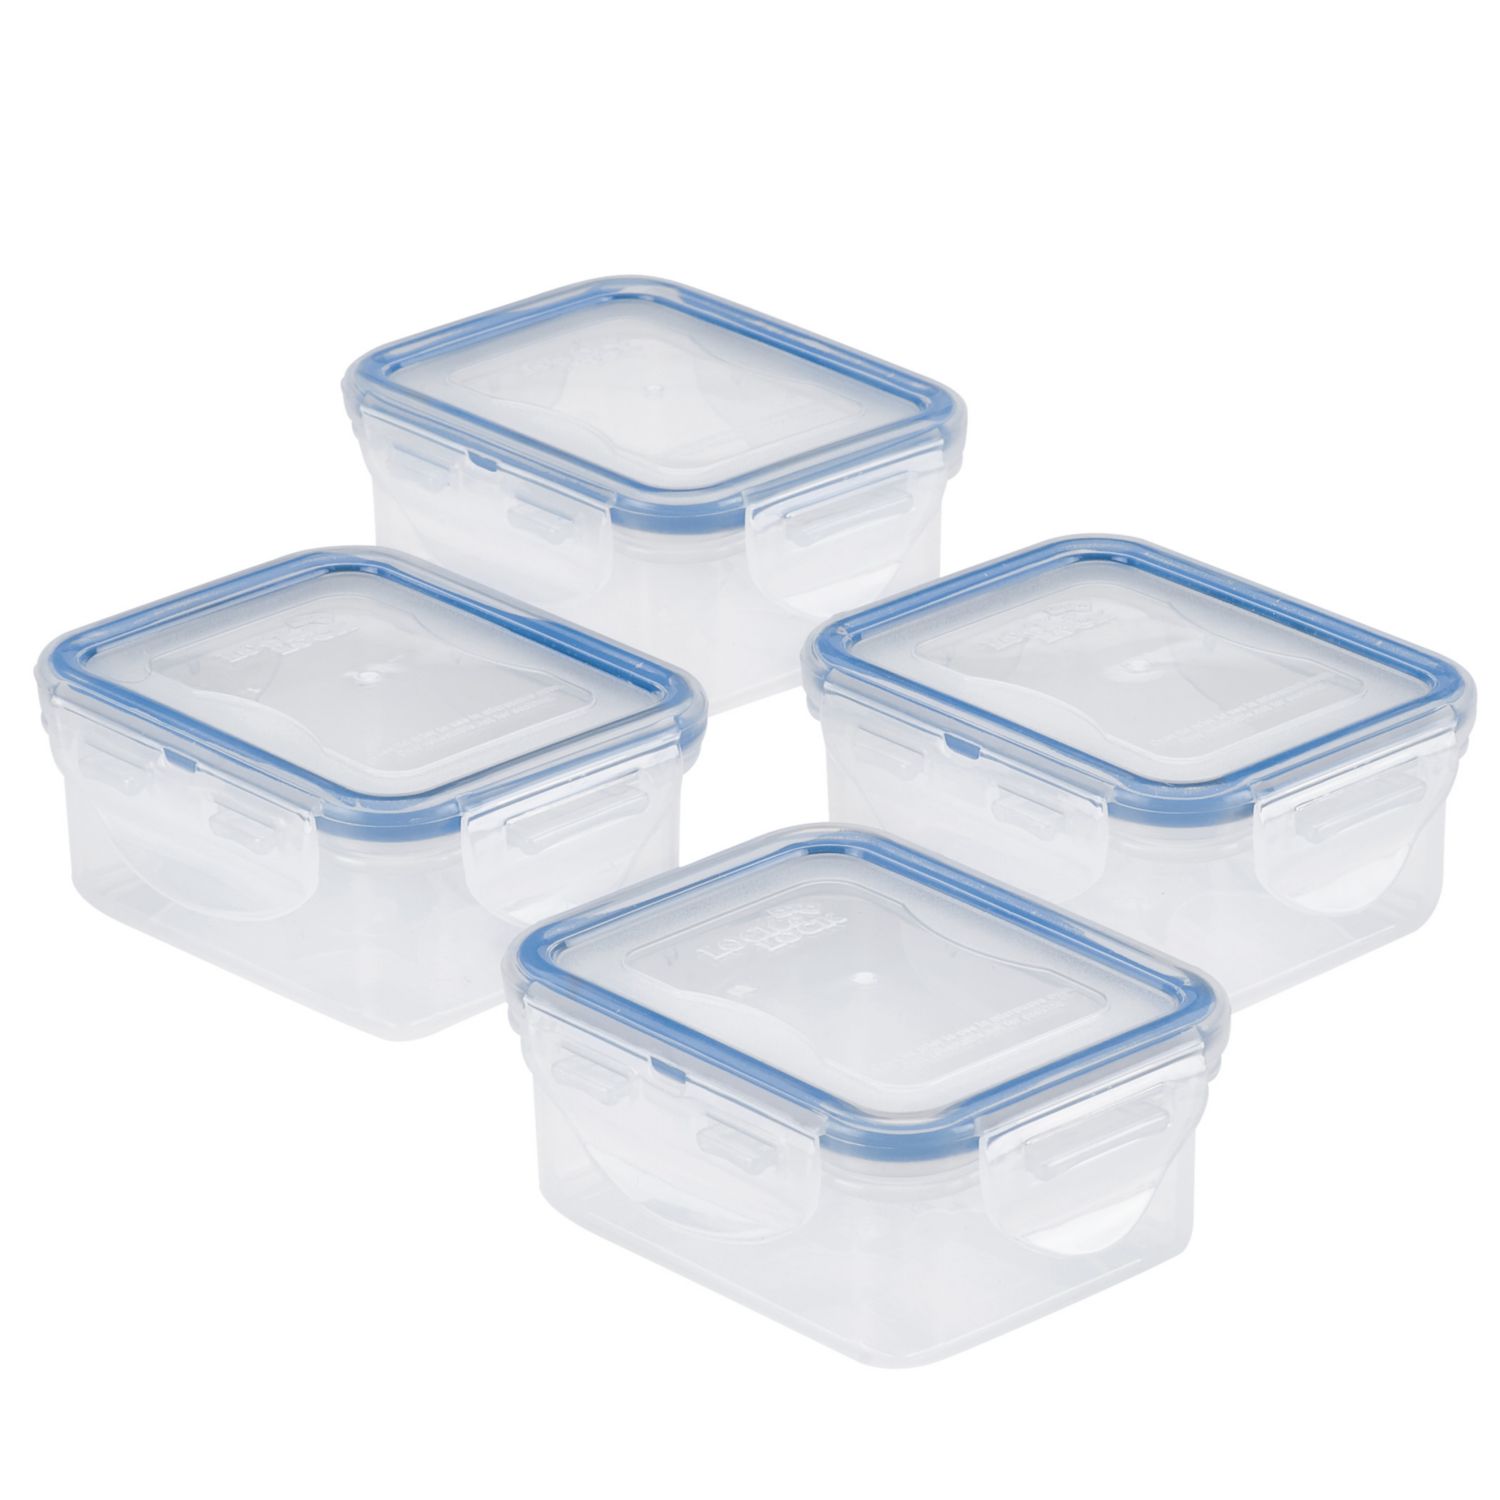 6-Piece/1.5L Food Storage Containers Set w/Easy Lock Lid, Airtight PLA